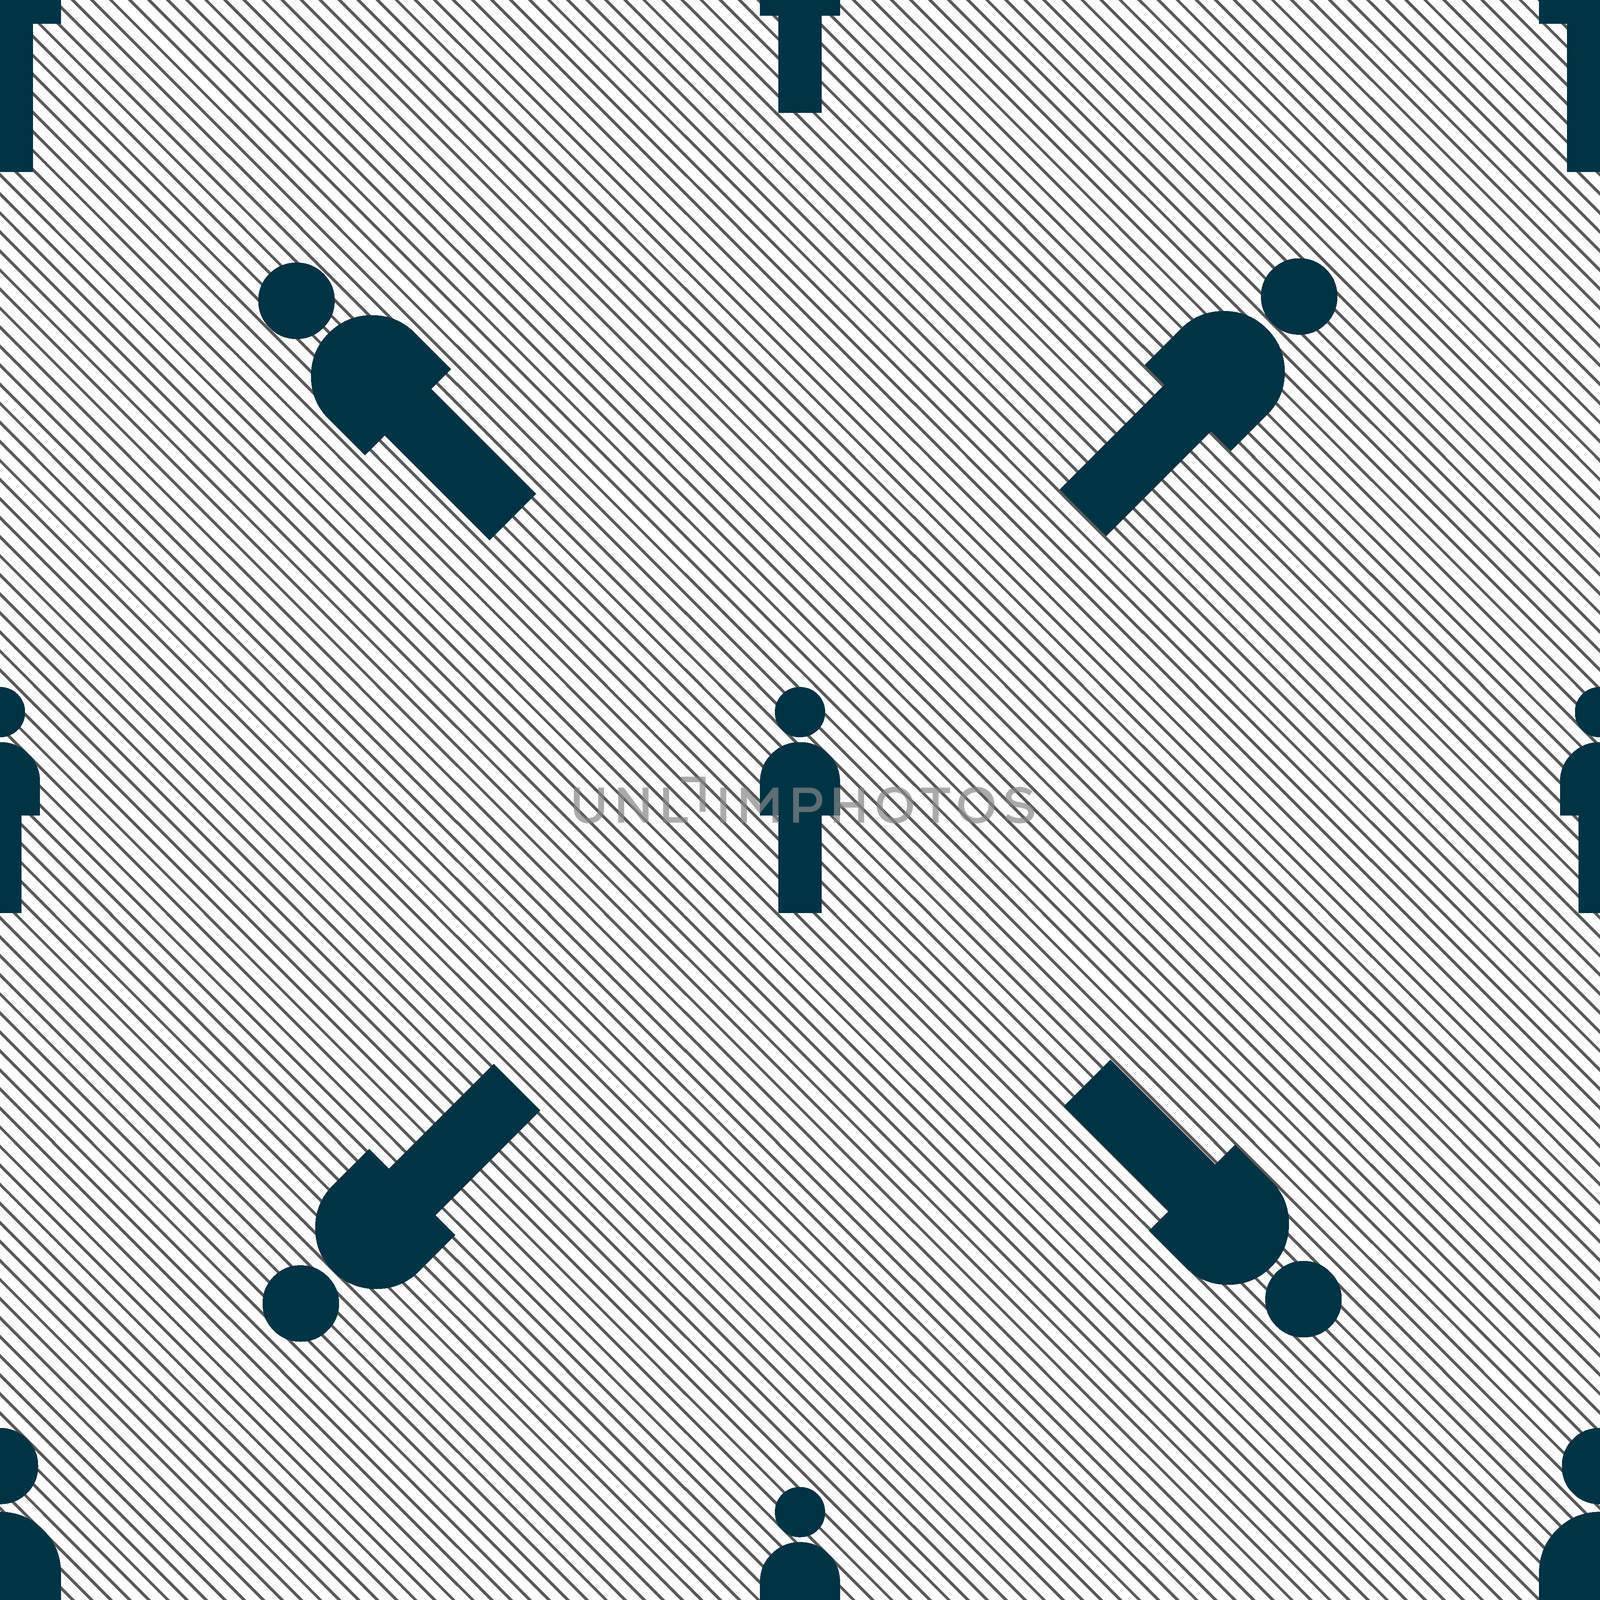 Human sign icon. Man Person symbol. Male toilet. Seamless pattern with geometric texture. illustration